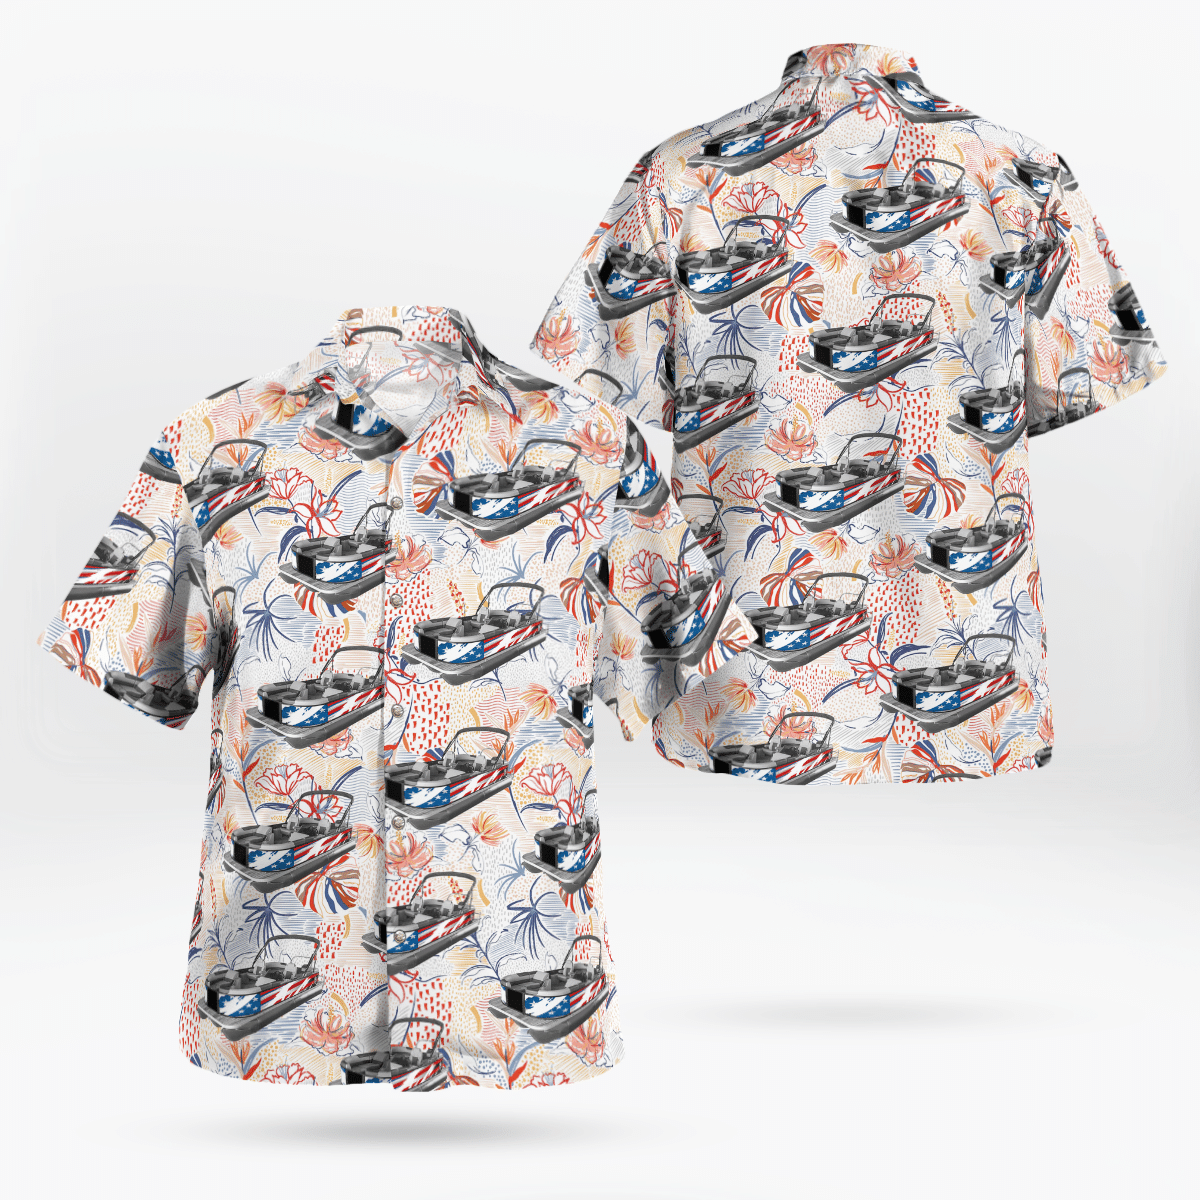 If you are in need of a new summertime look, pick up this Hawaiian shirt 3